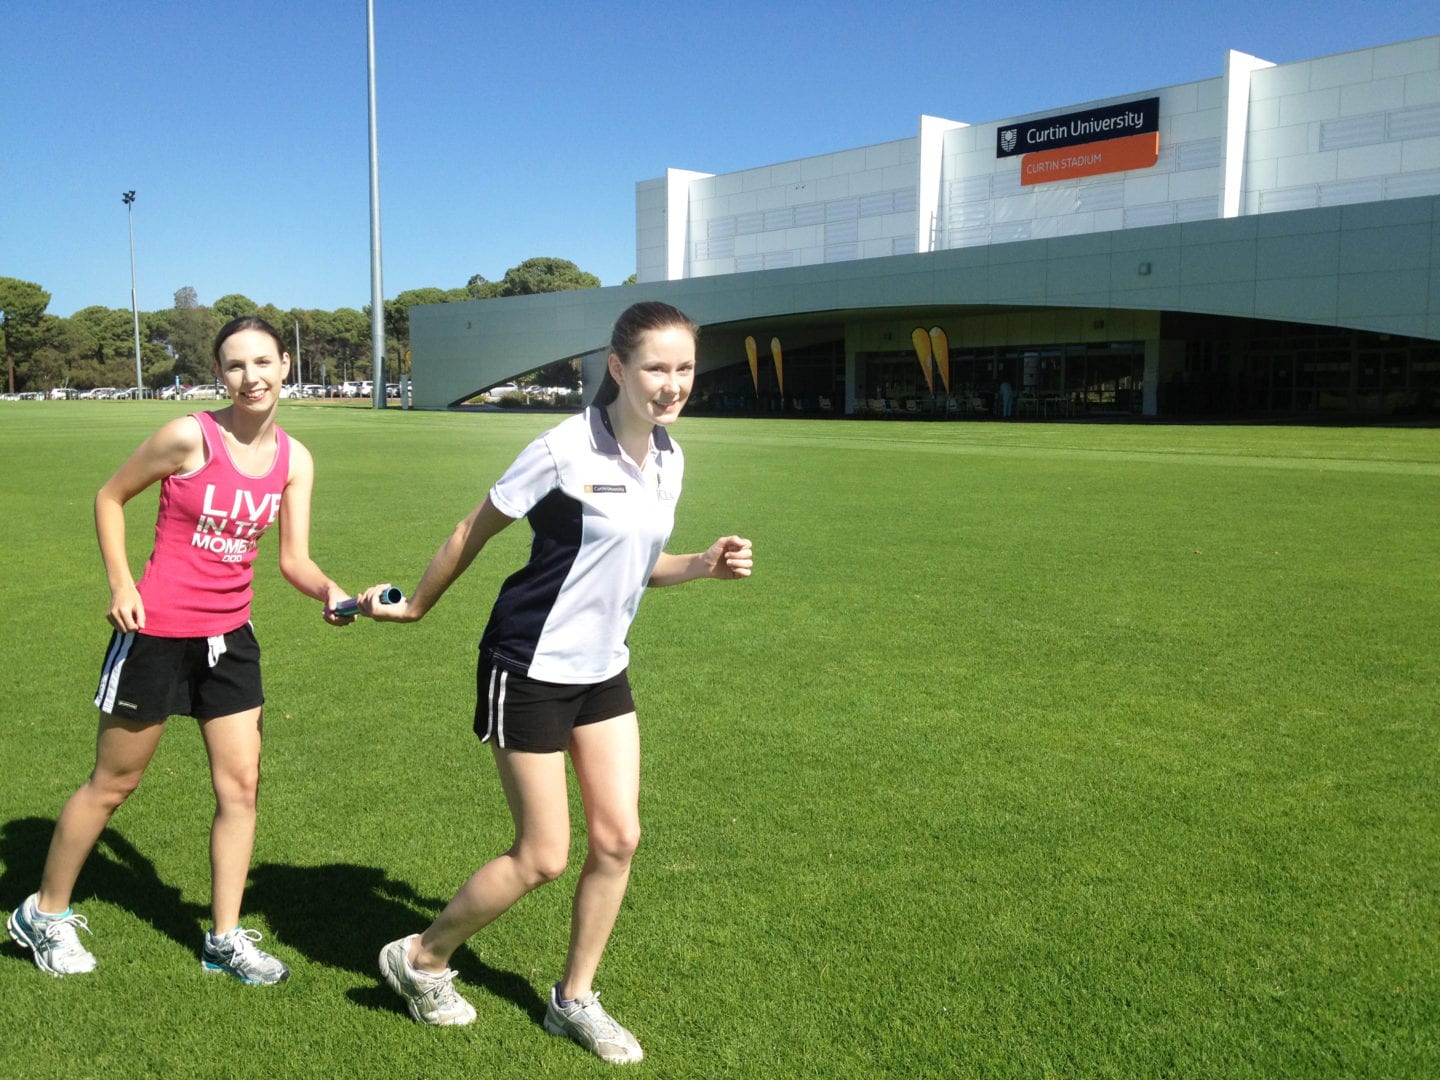 Image for Curtin students lap up opportunity to support Relay for Life